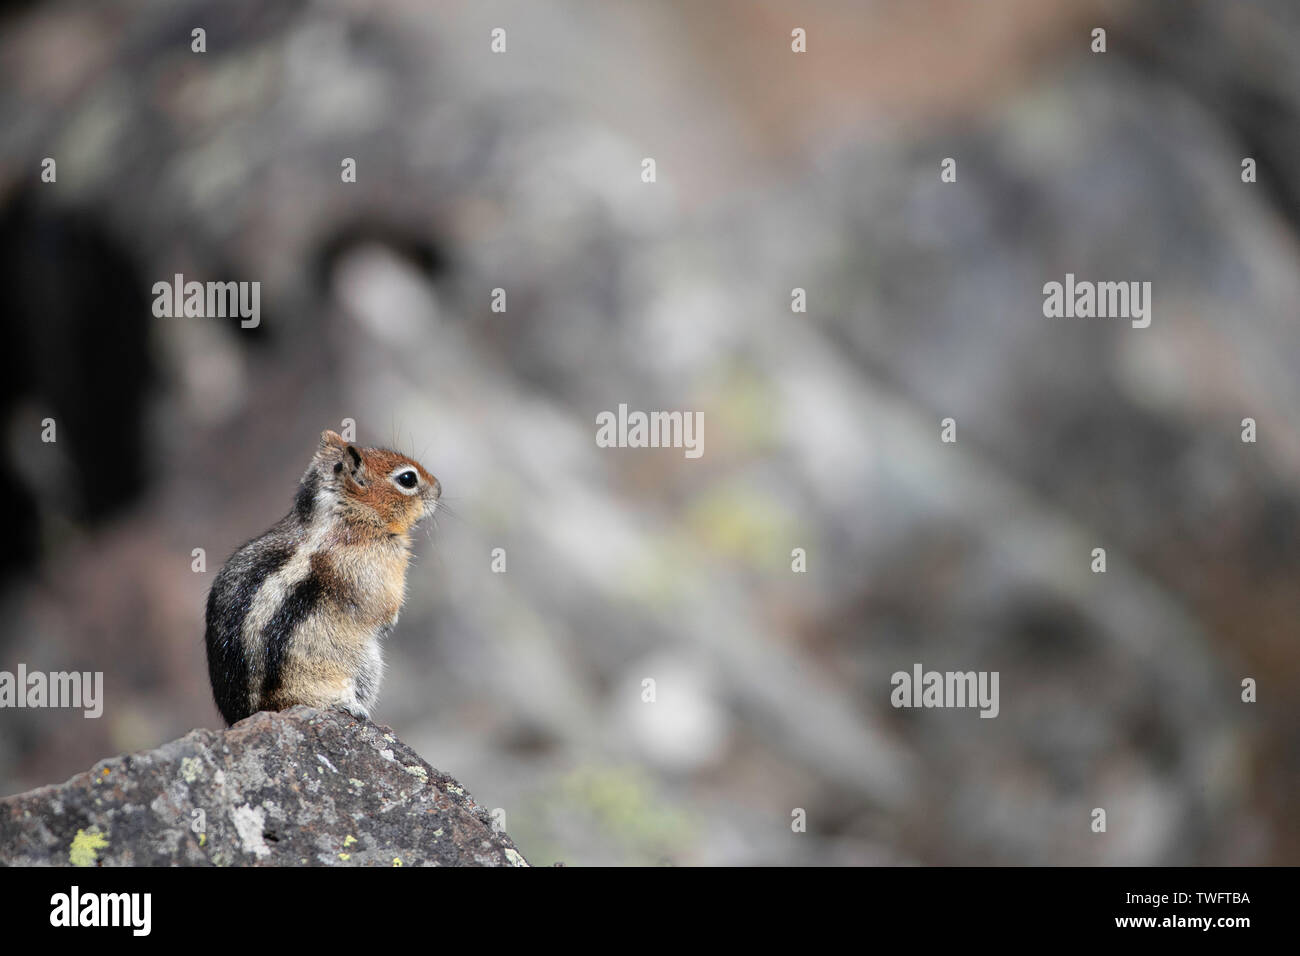 Golden-mantled ground squirrel (Callospermophilus lateralis) sitting on a rock. Stock Photo